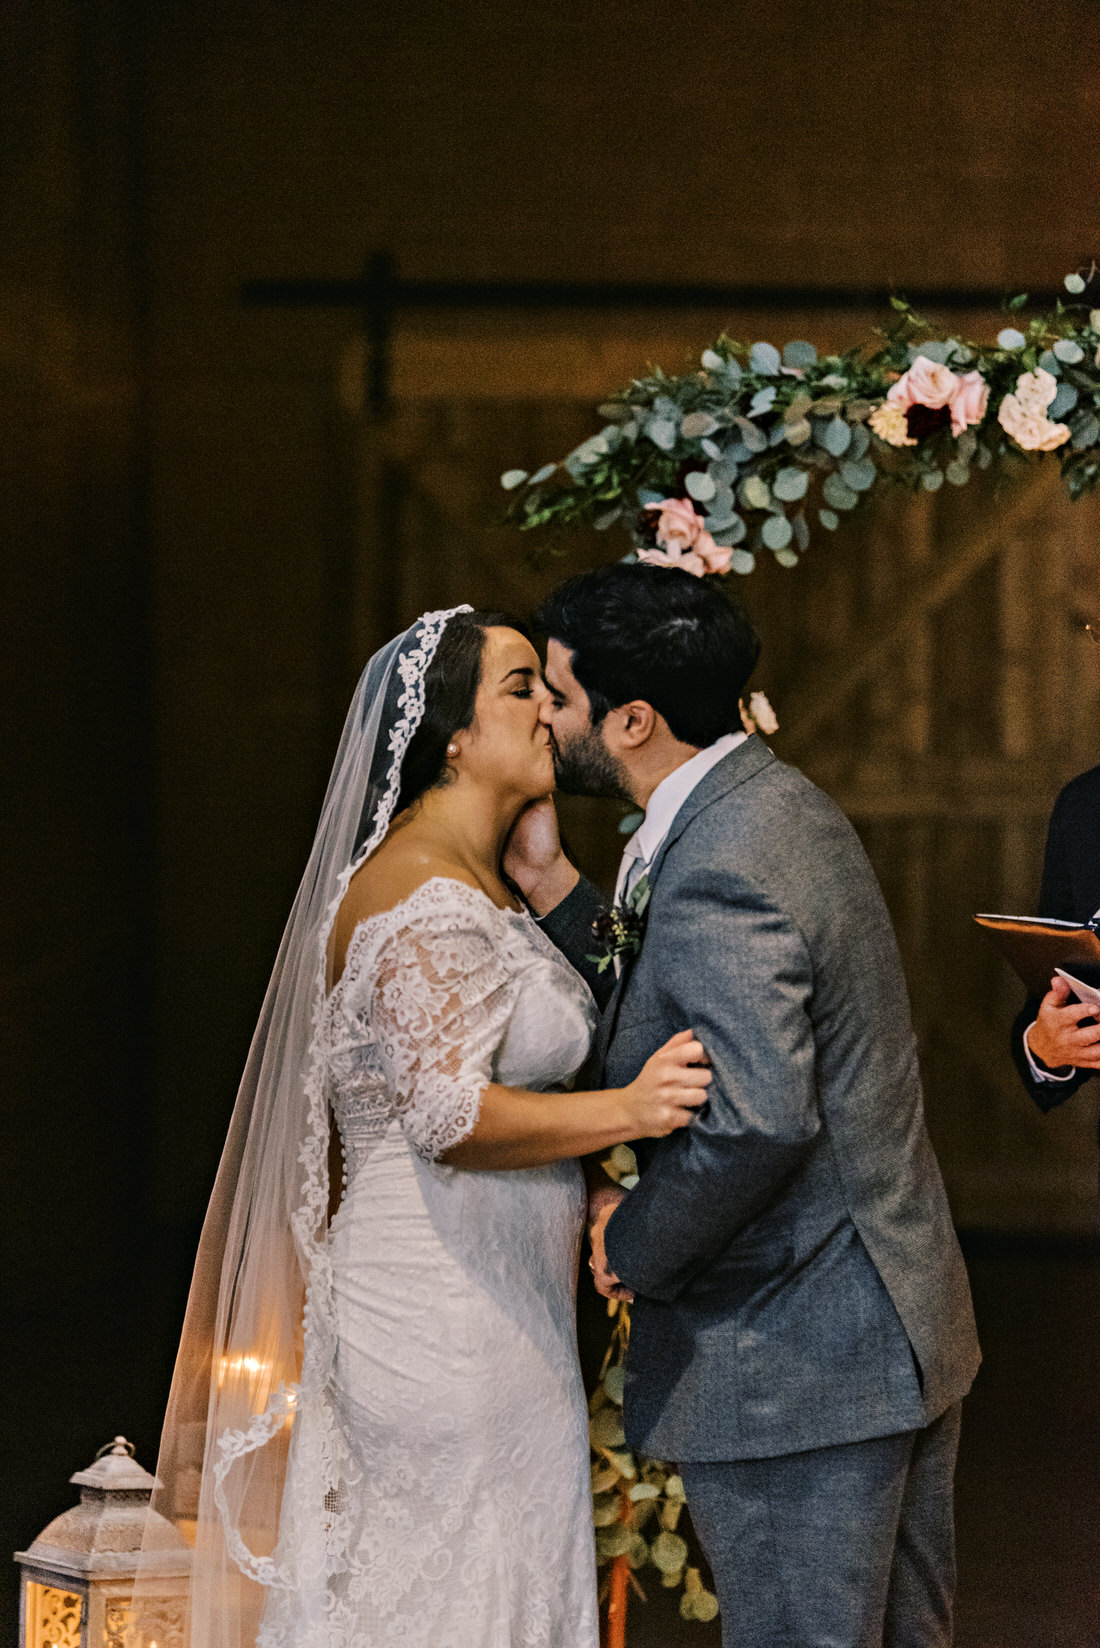 Bride and groom kissing for the first time as husband and wife